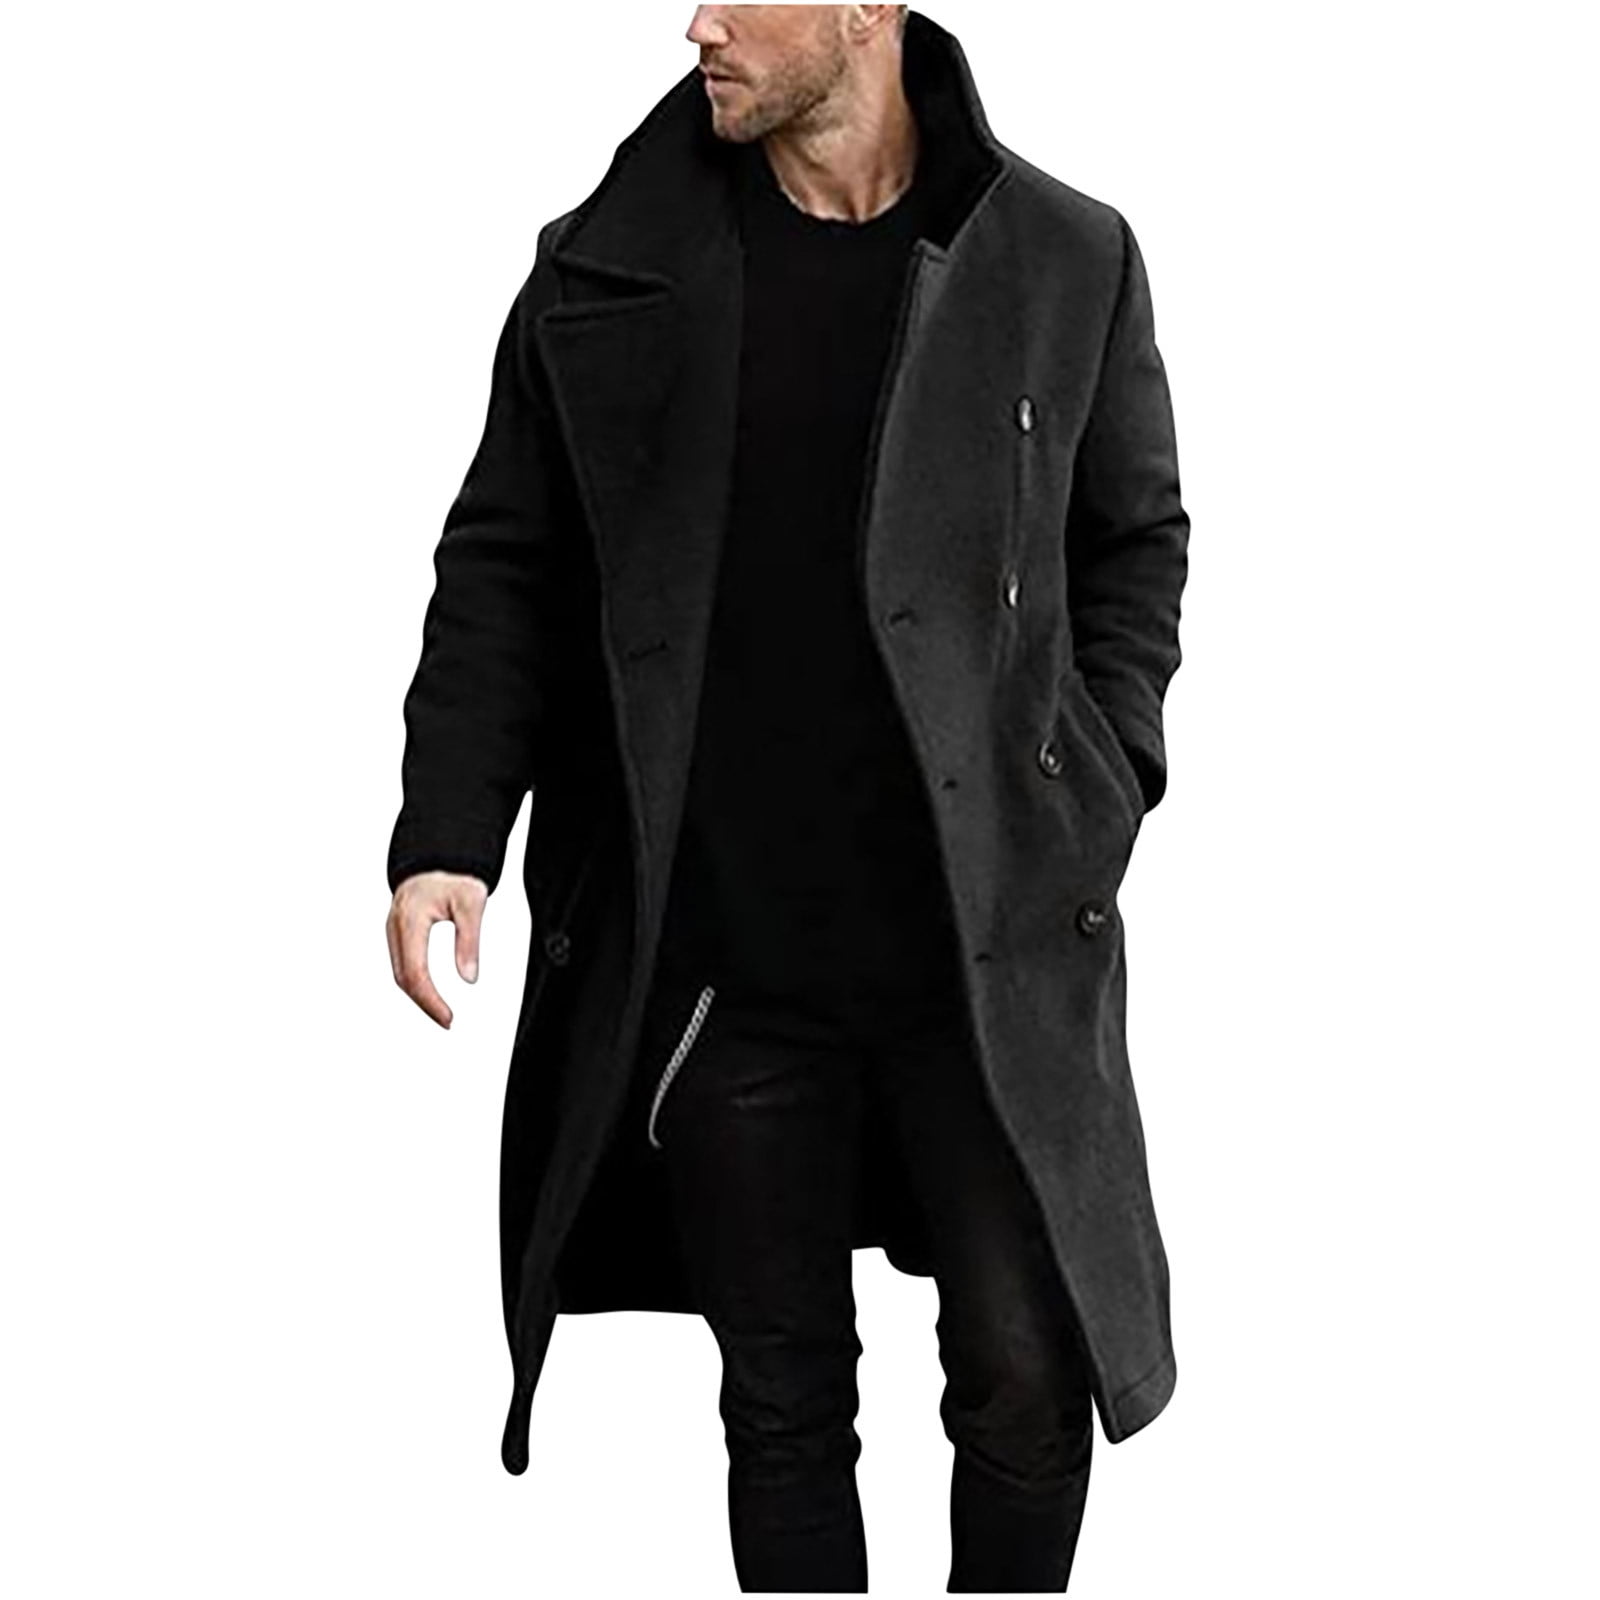 Men's Wool Blends Double-Breasted Pea Coat Fashion Stand Collar ...